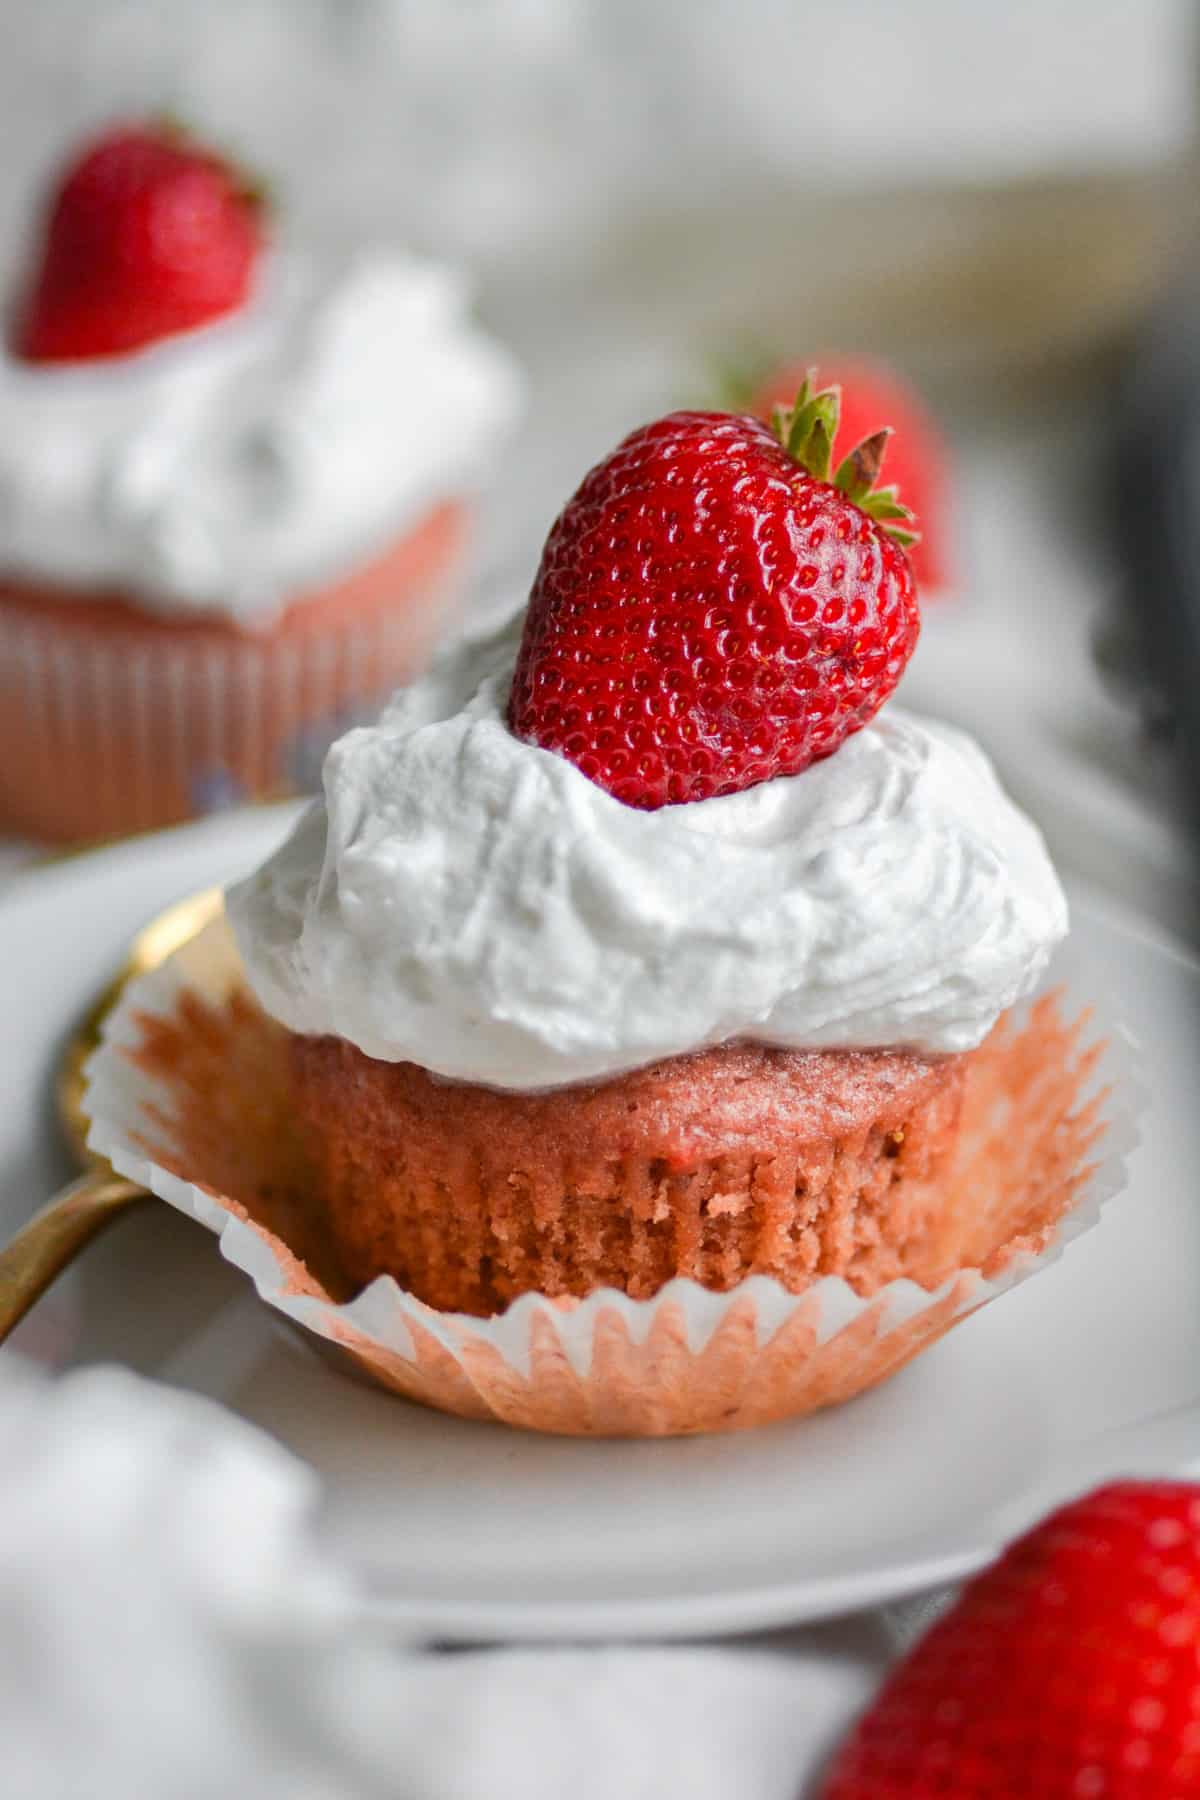 Vegan Strawberry Cupcakes topped with chipped cream and a fresh strawberry sitting in the cupcake wrapper.